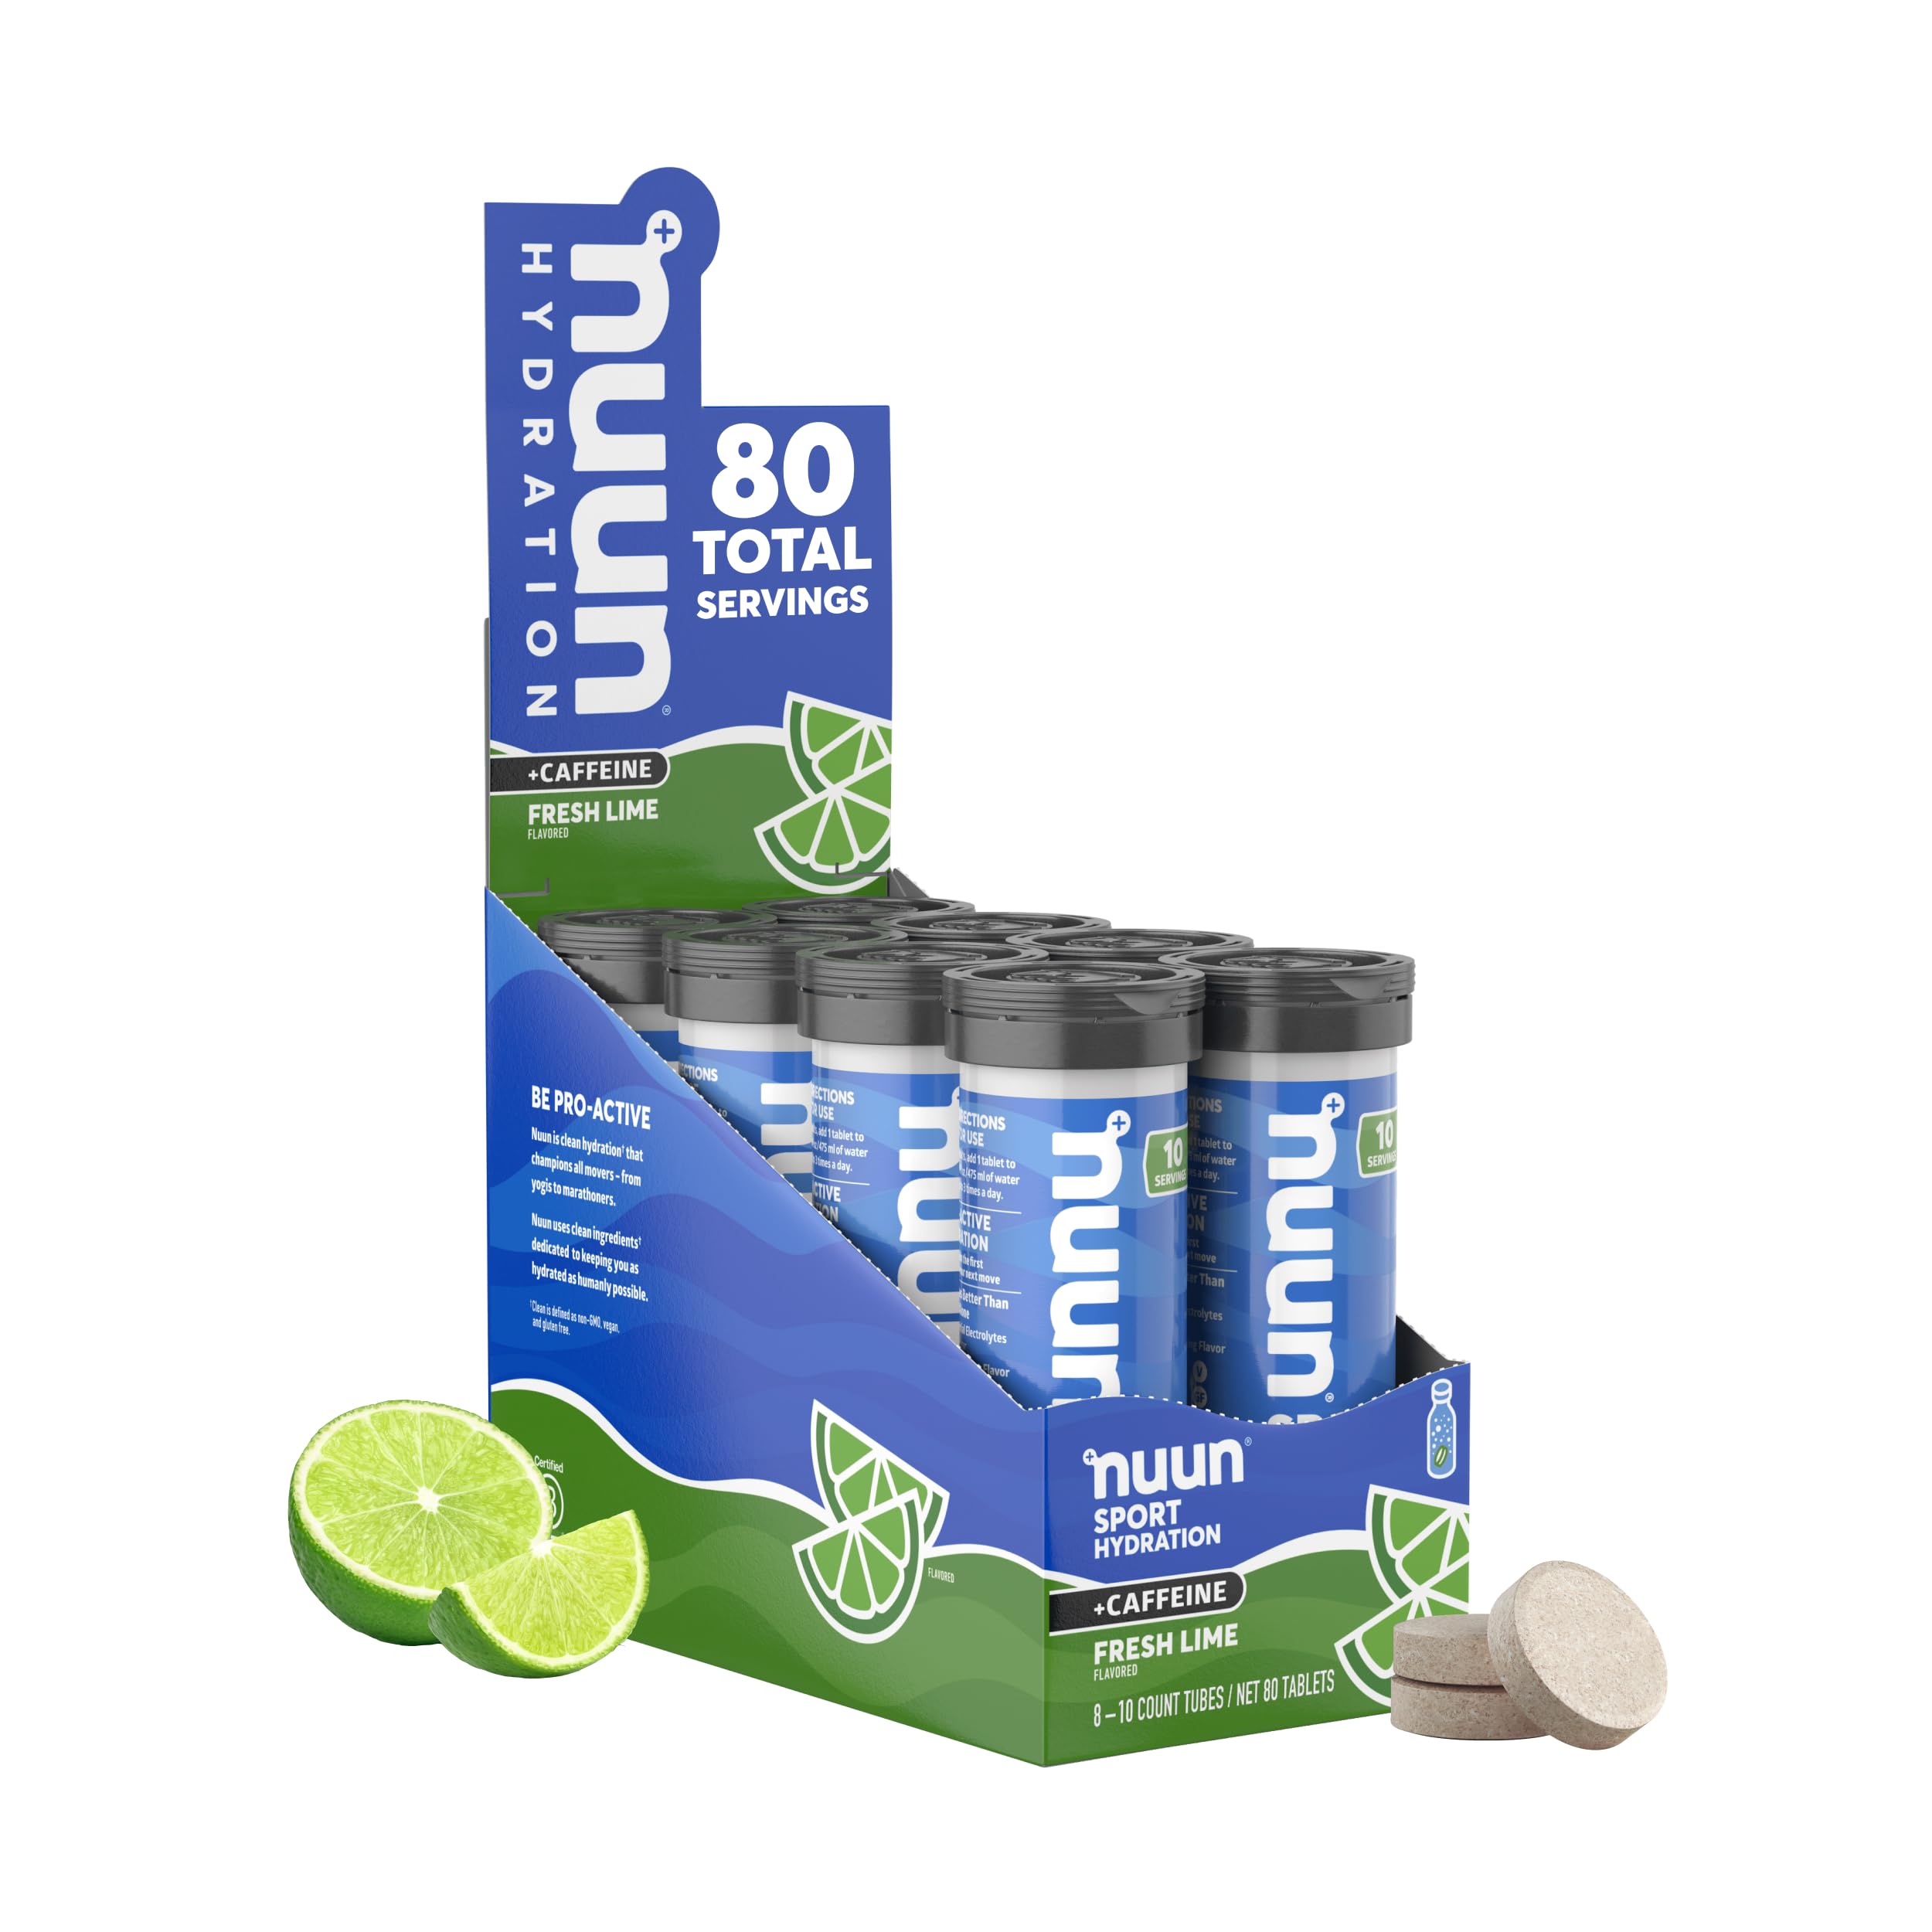 Nuun Sport + Caffeine Electrolyte Tablets for Proactive Hydration, Fresh Lime, 8 Pack 80 Servings $20.82 